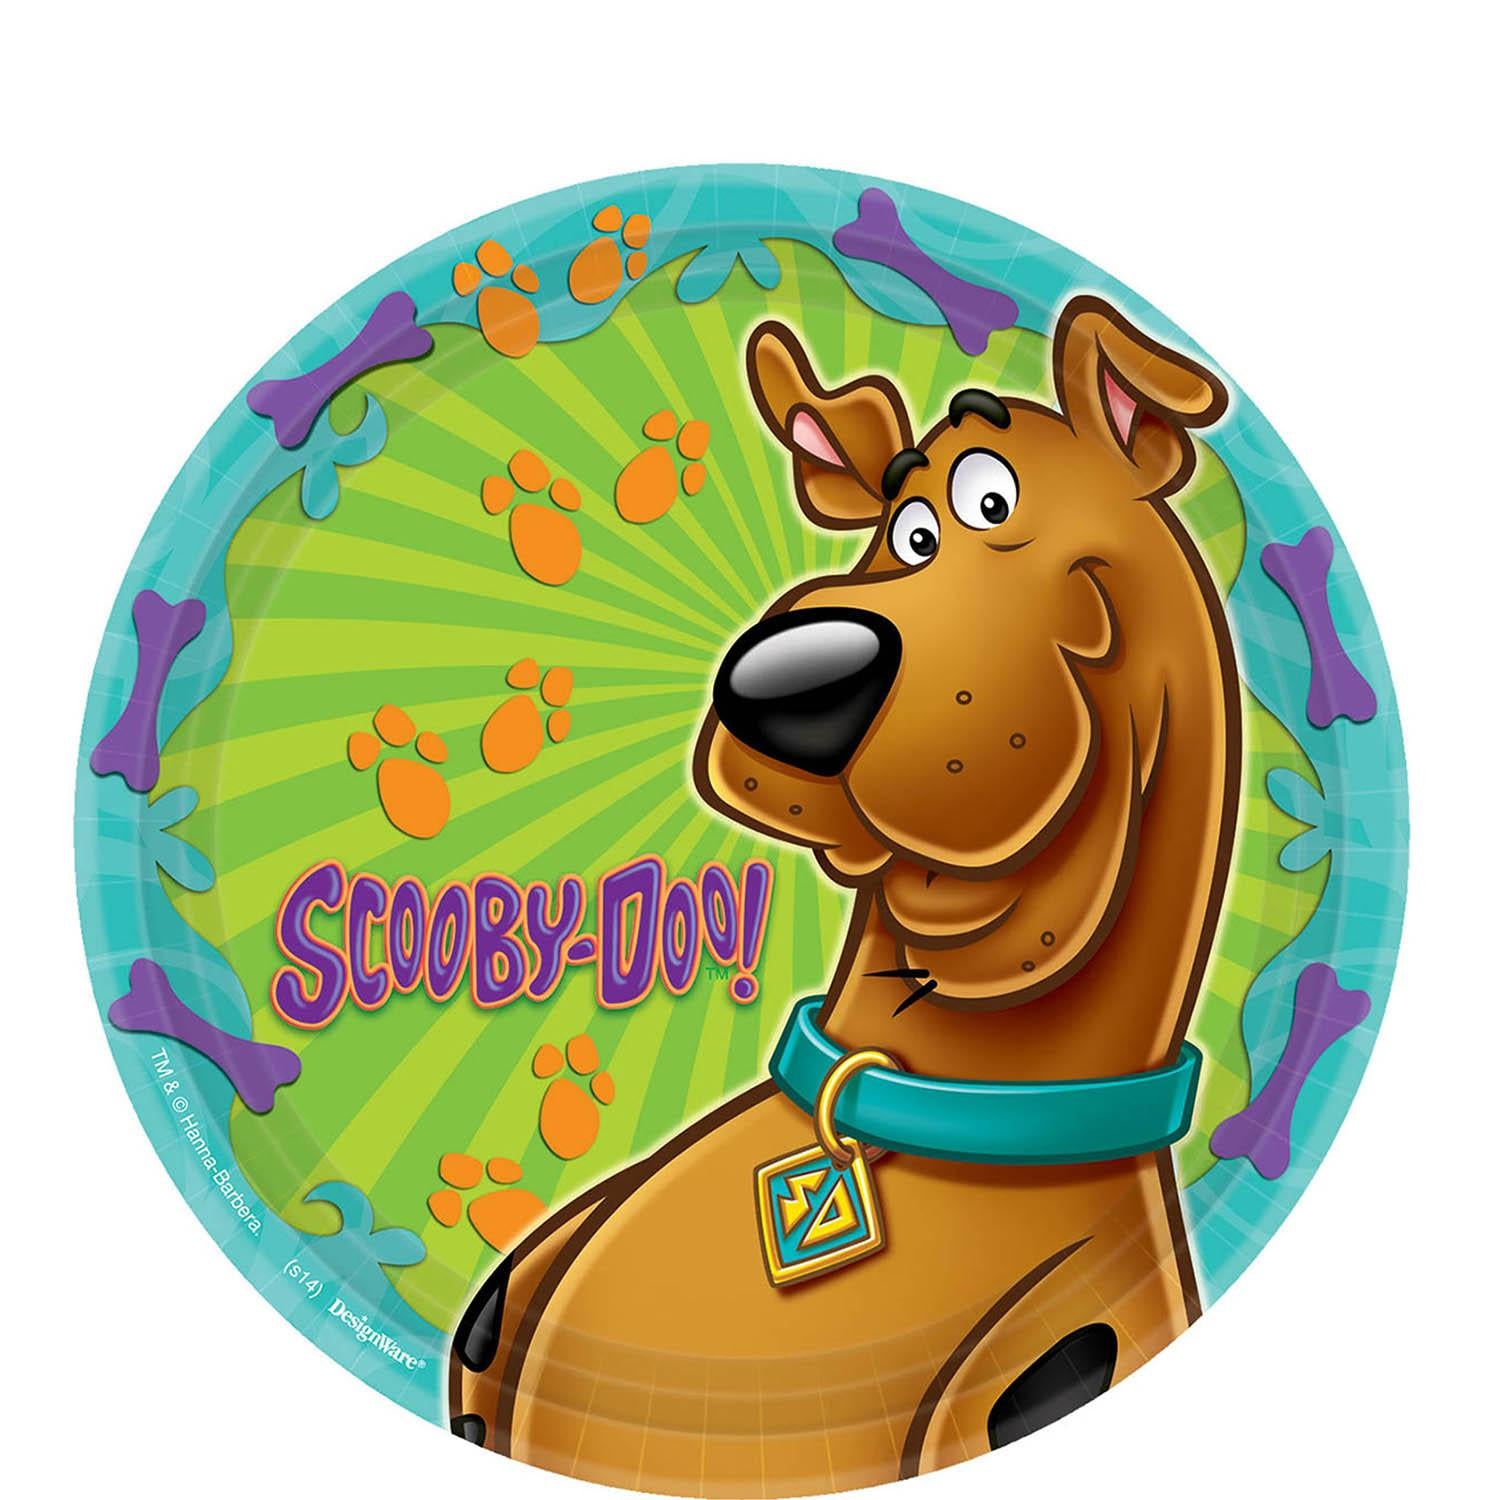 Scooby-Doo Plates 9in, 8pcs Printed Tableware - Party Centre